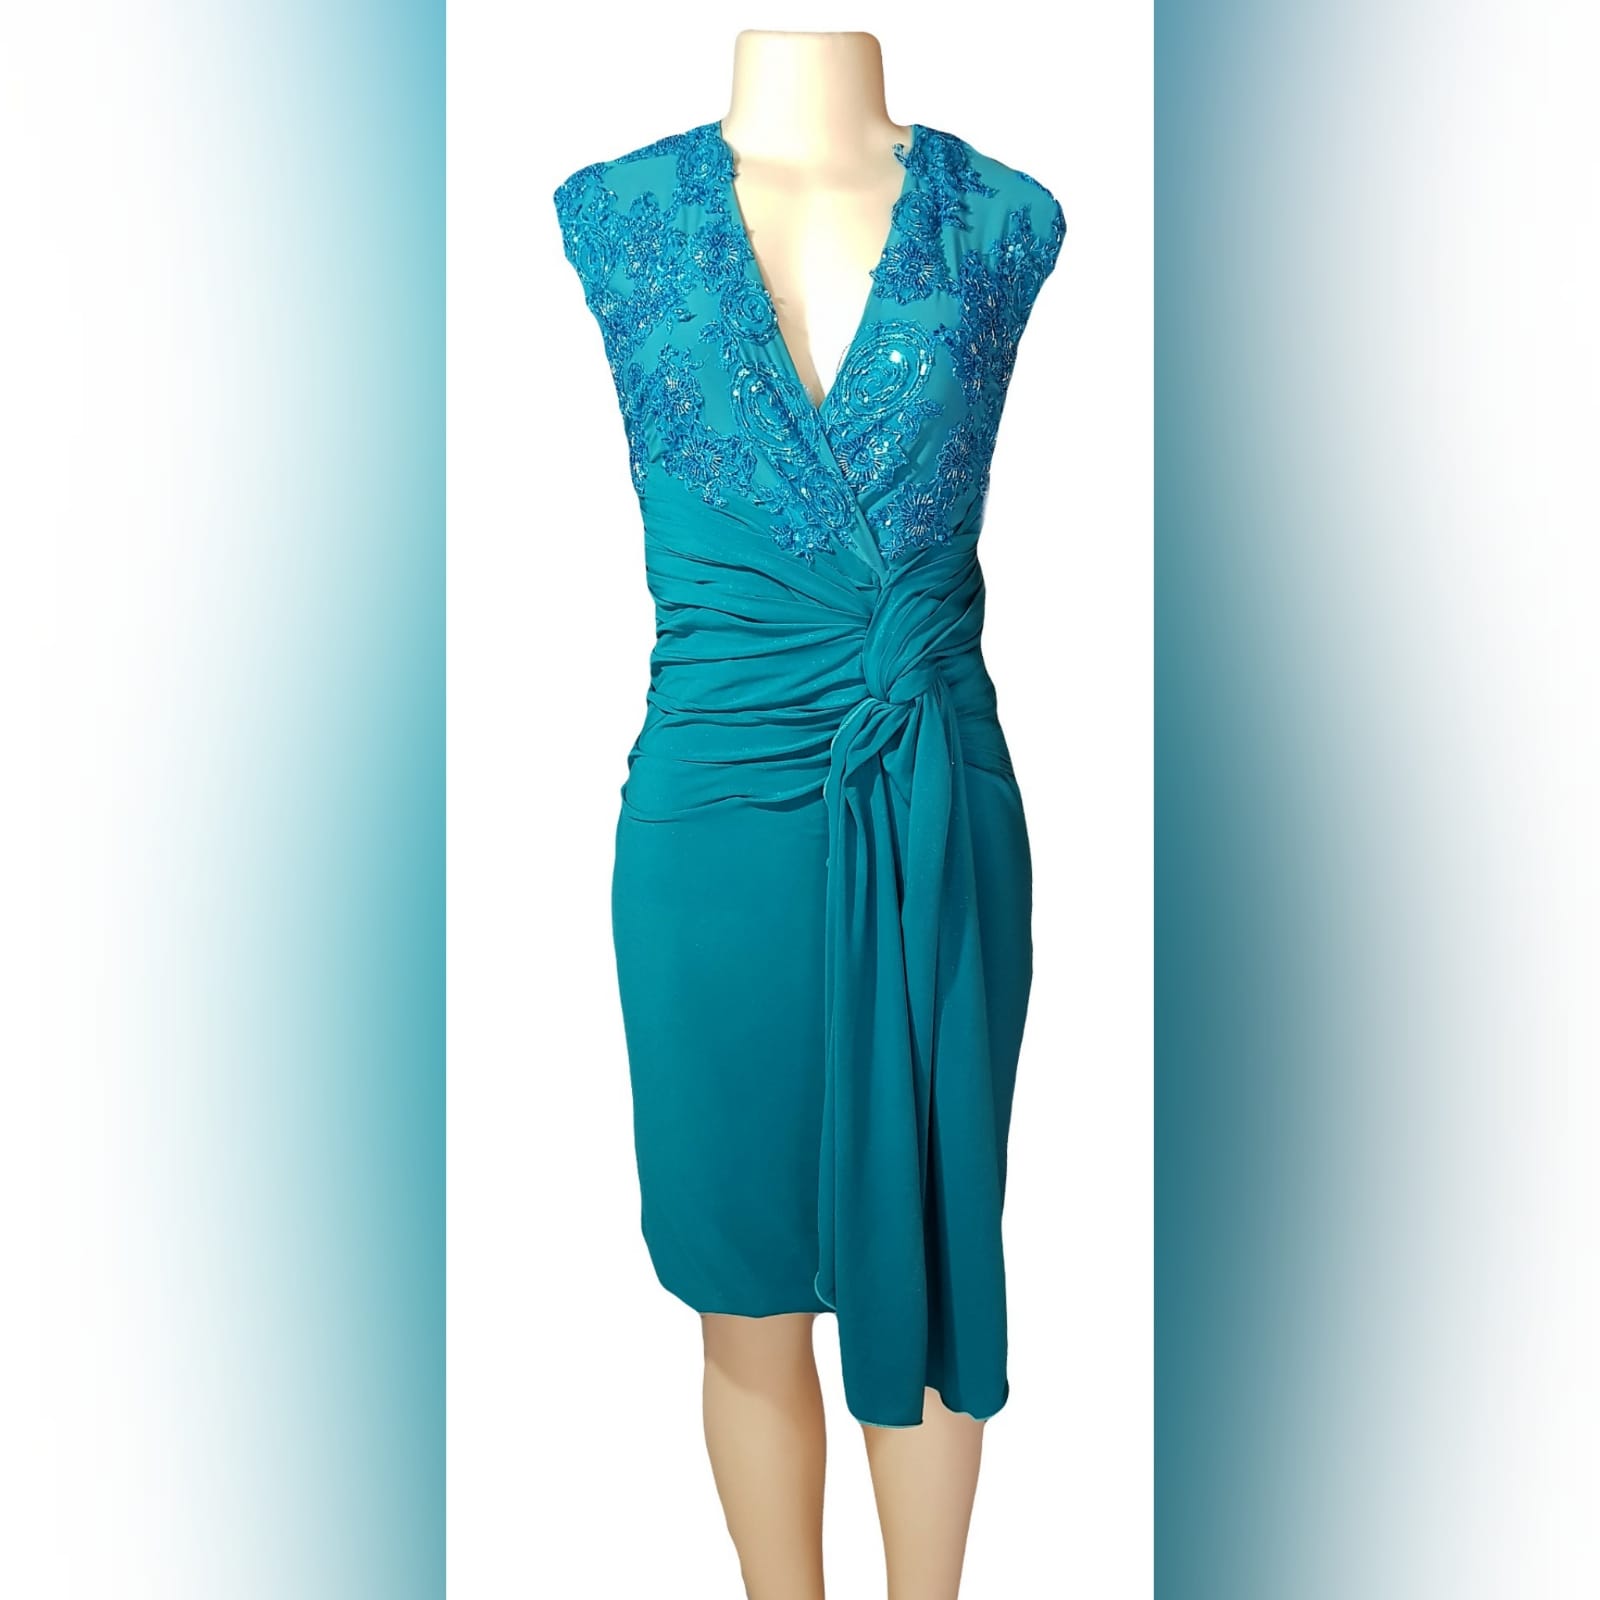 Pencil fit turquoise knee length formal dress 5 a pencil fit turquoise knee length formal dress, created for a wedding for mother of bride. This simple elegant design has a crossed v neckline detailed with beaded lace. A ruched belt with ends on the side over the dress.